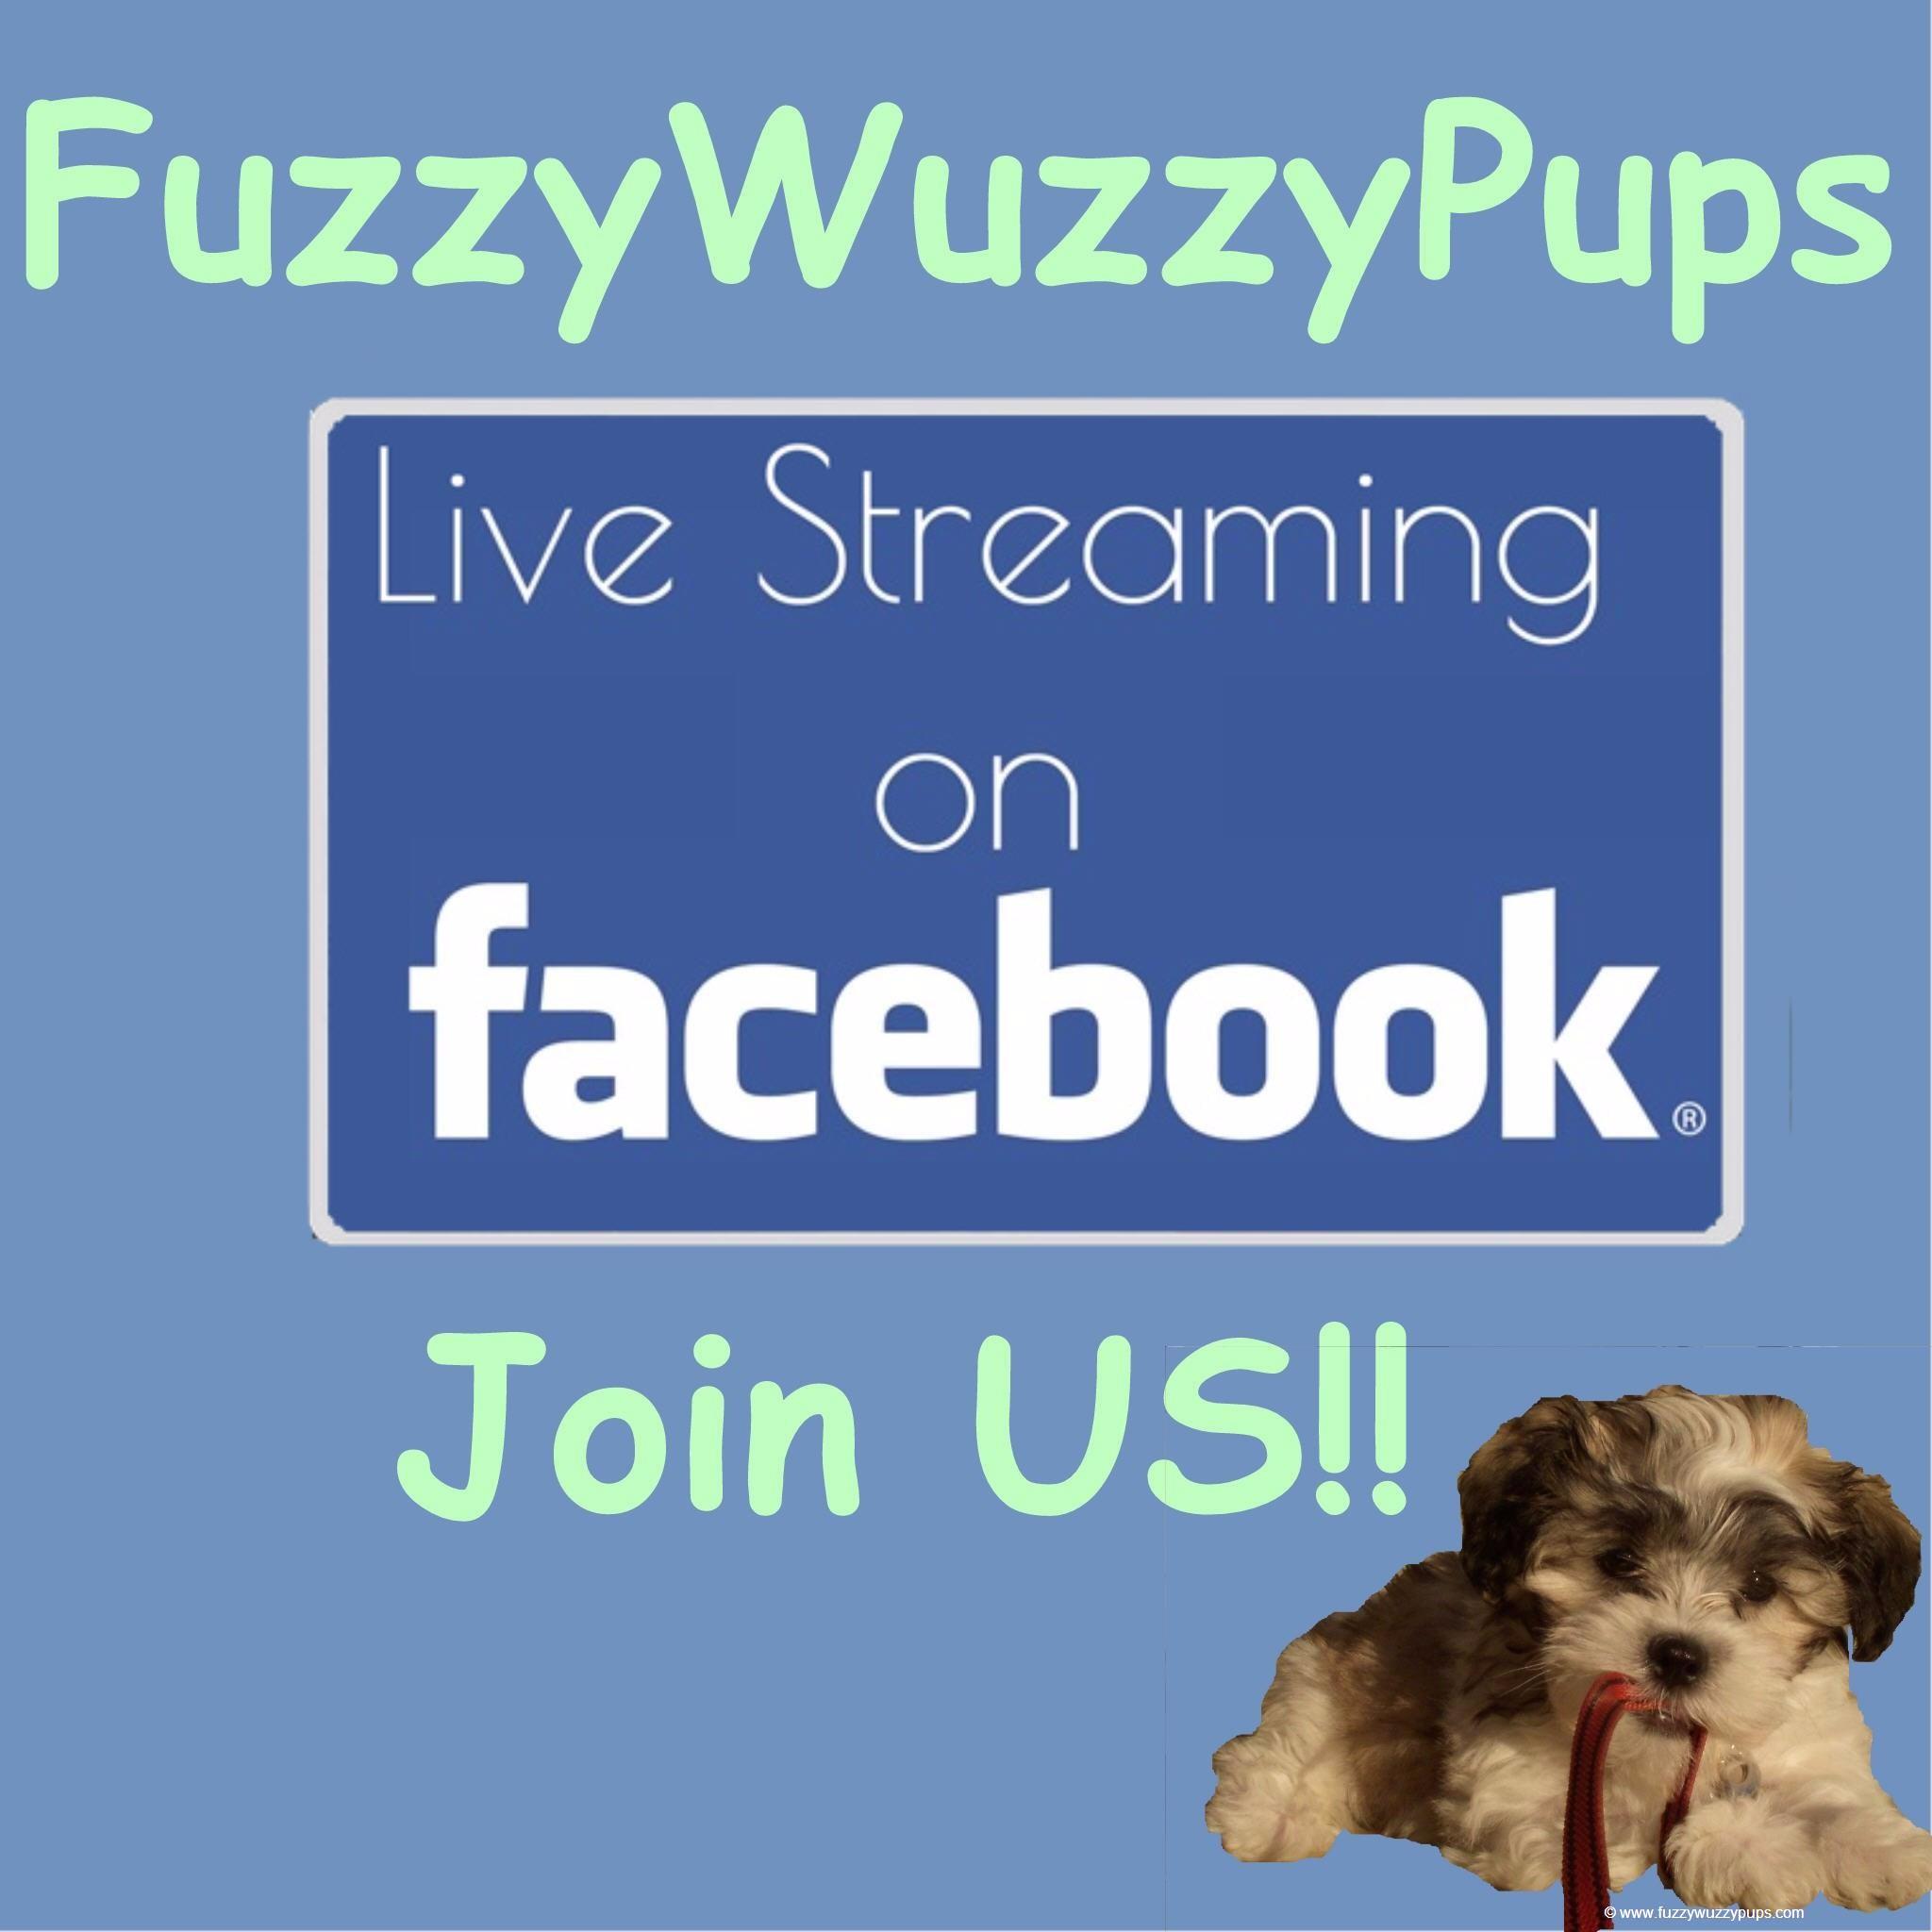 FUZZYWUZZYPUPS LIVE!! Join US...